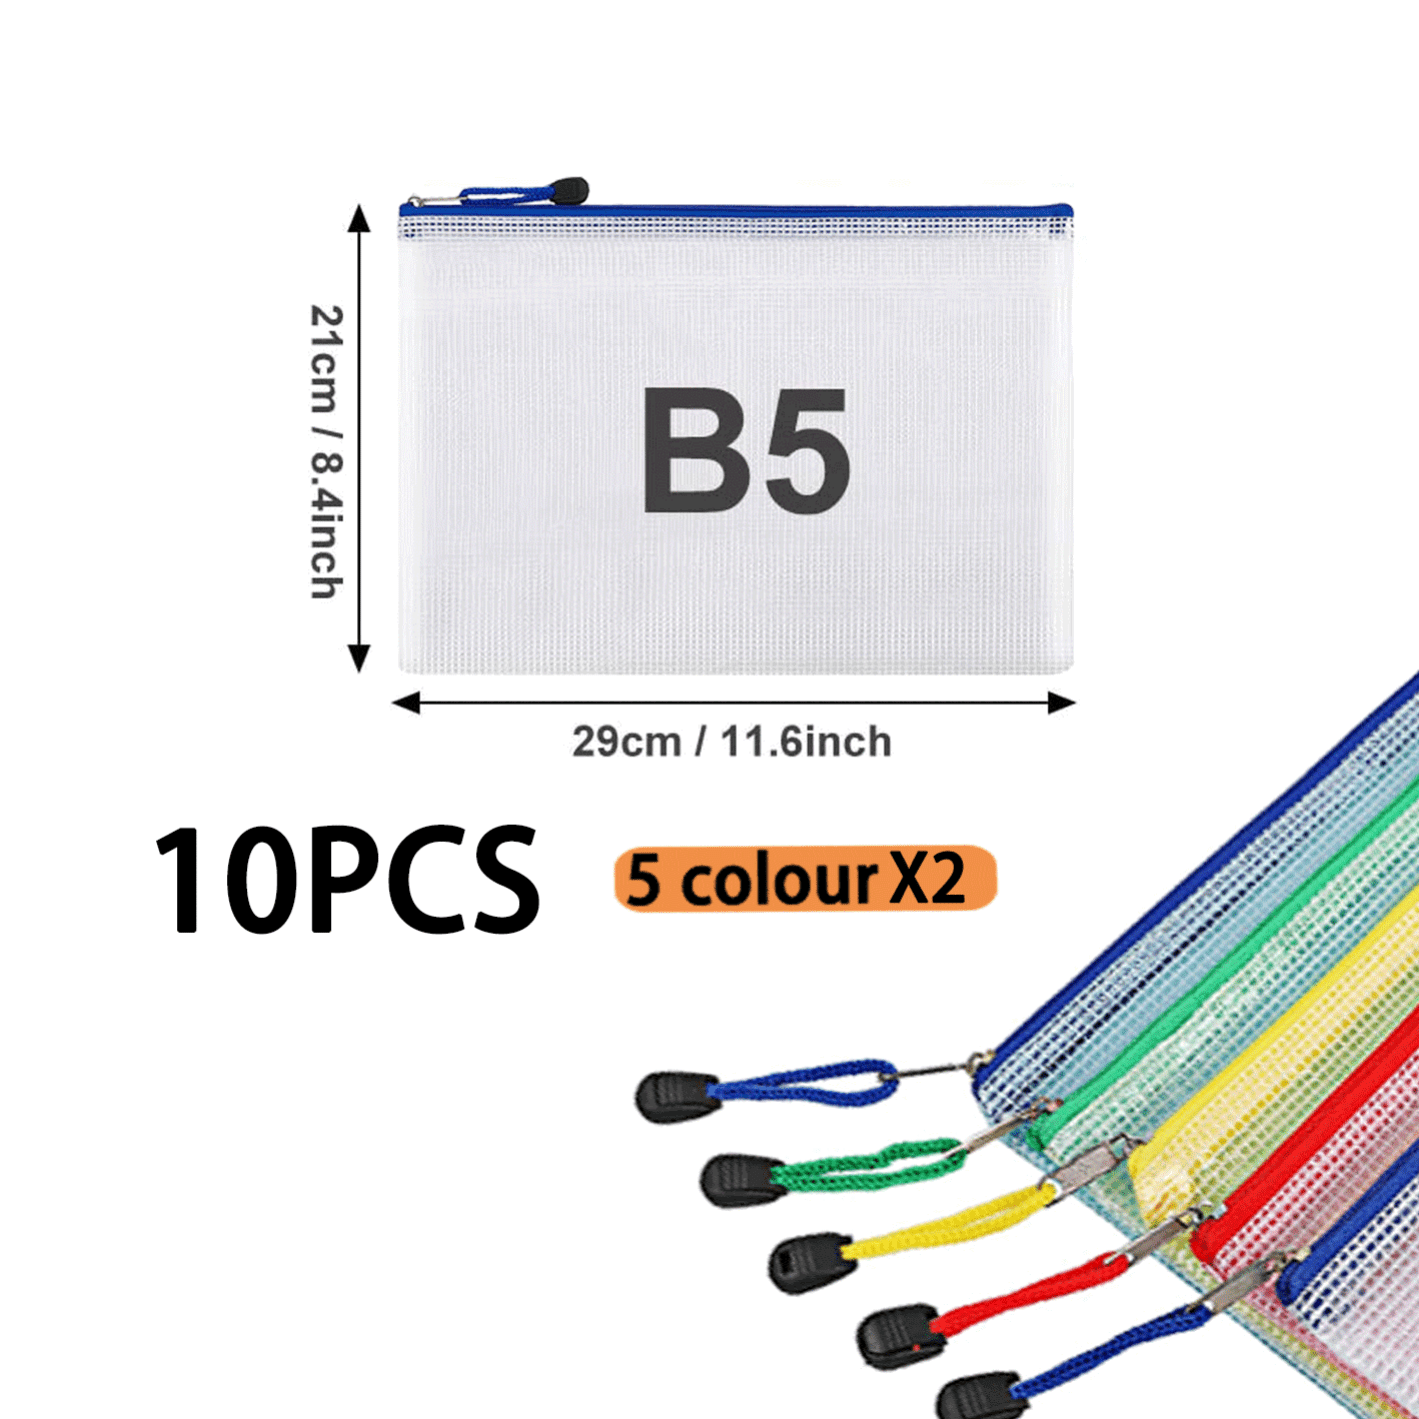 Mesh Zipper Pouch Zipper File Bags, Puzzle Project Bags for Cross Stitch  and Organizing Storage,Size A4 Size for Travel, School, Board Games and  Office Supplies， 